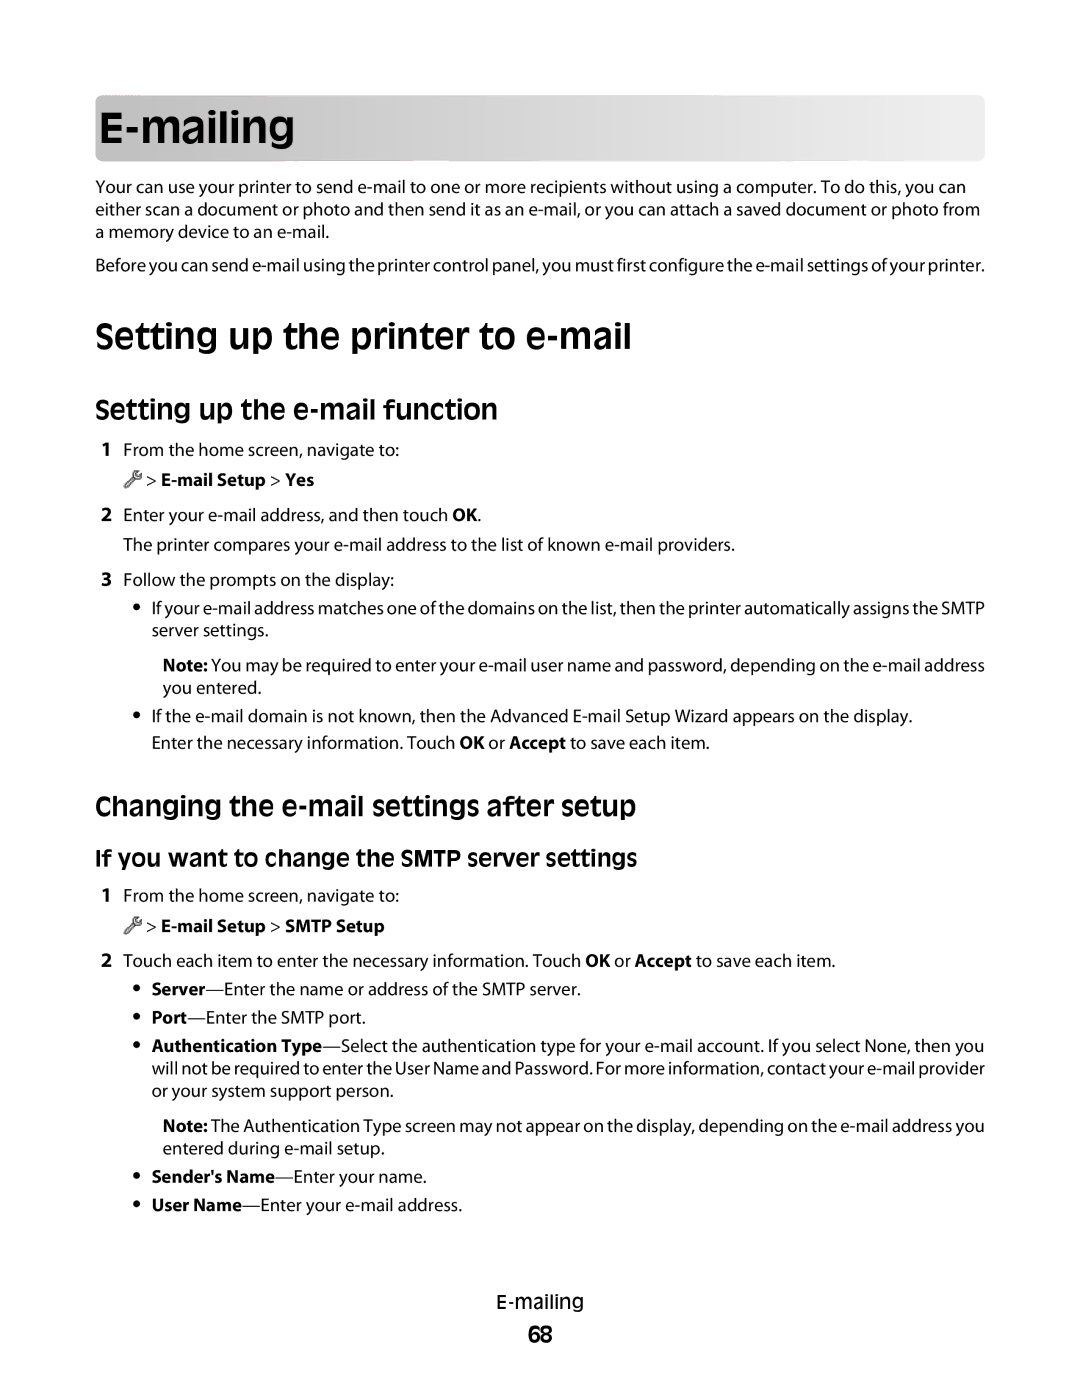 Lexmark S800 manual Mailing, Setting up the printer to e-mail, Setting up the e-mail function 